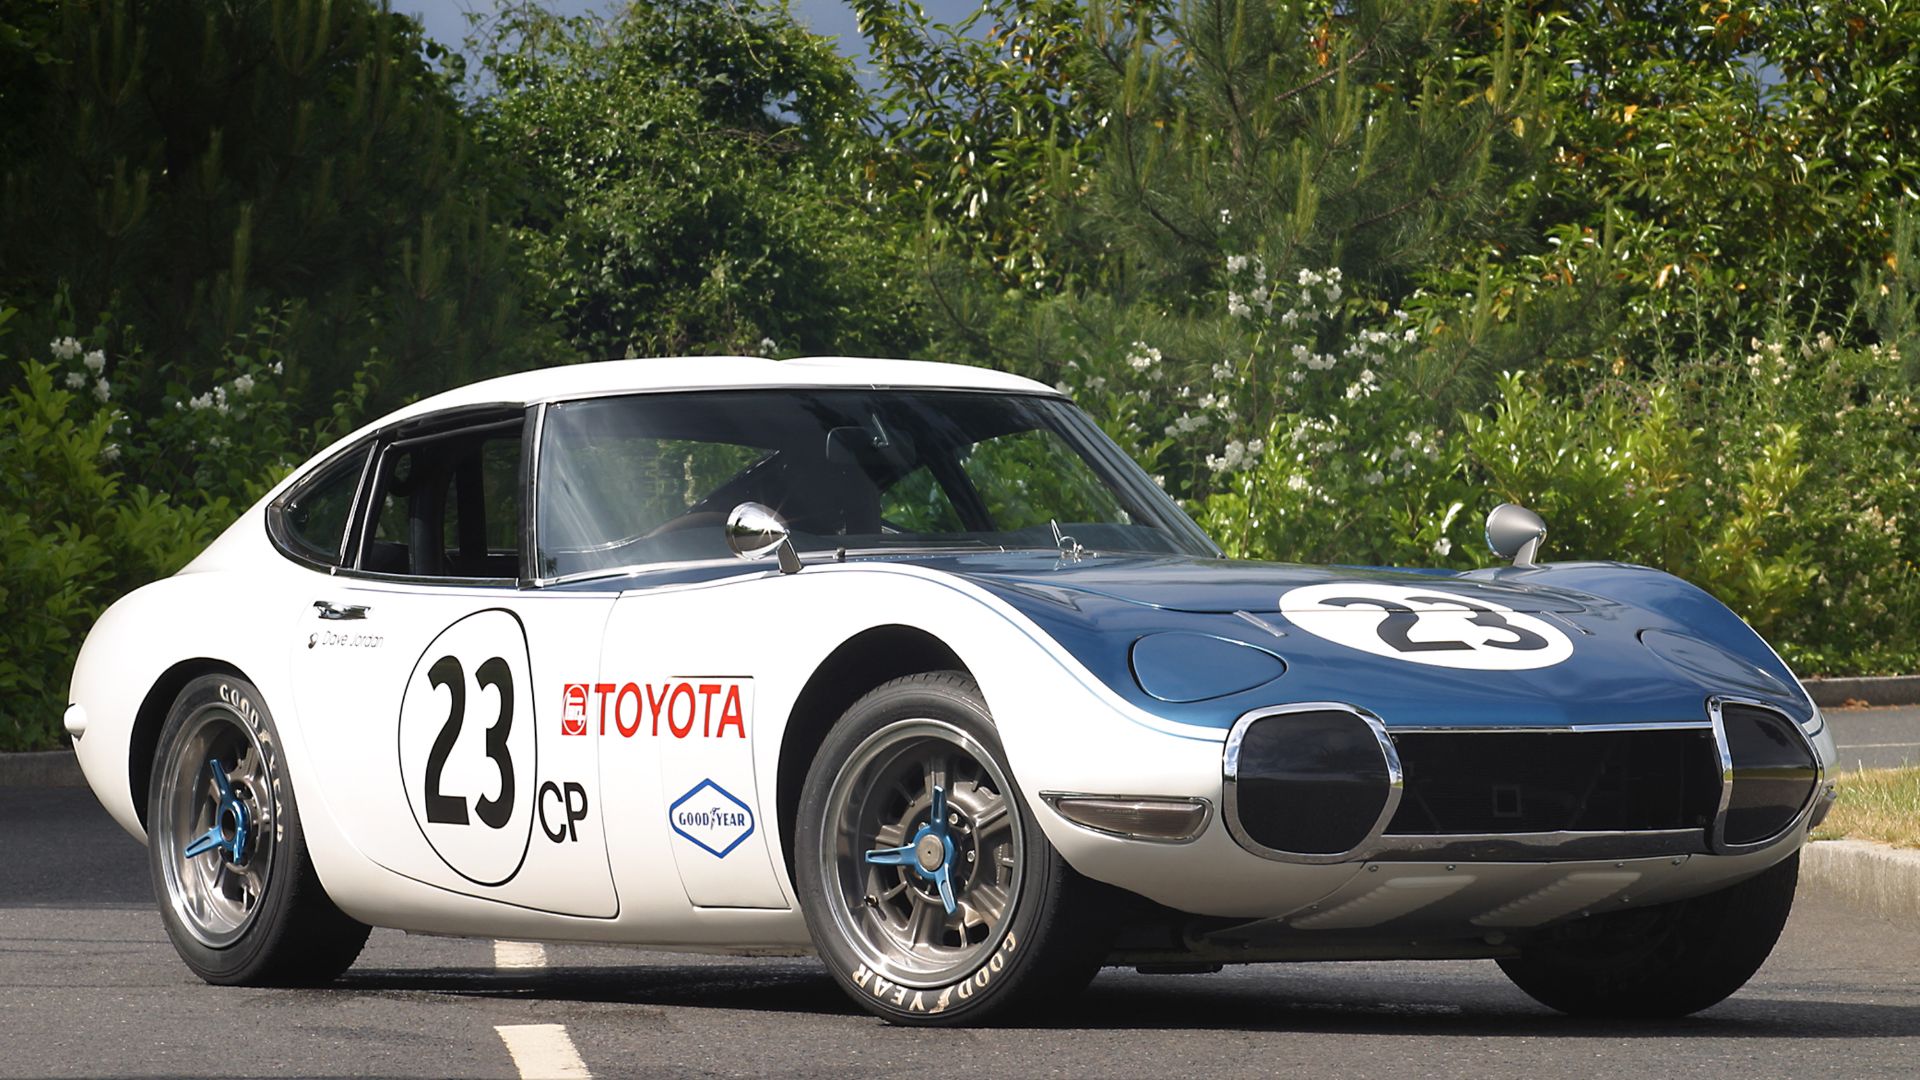 Shelby Toyota 2000GT